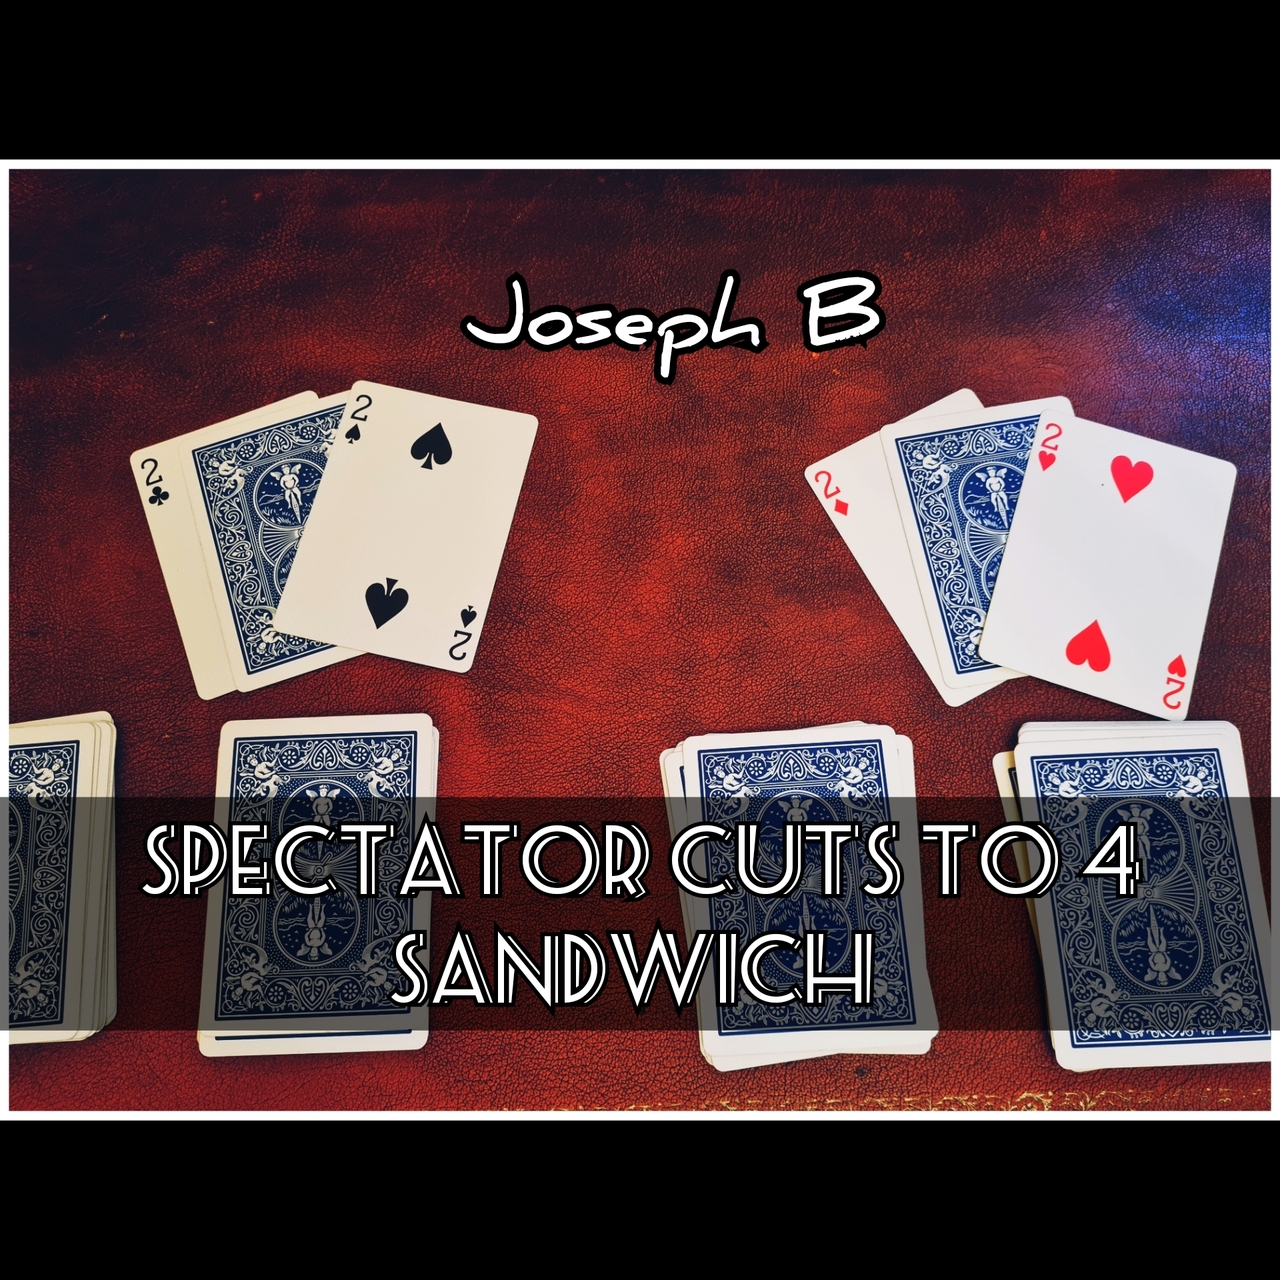 The Spectator Cuts to Four Sandwich by Joseph B. (MP4 Video Download)